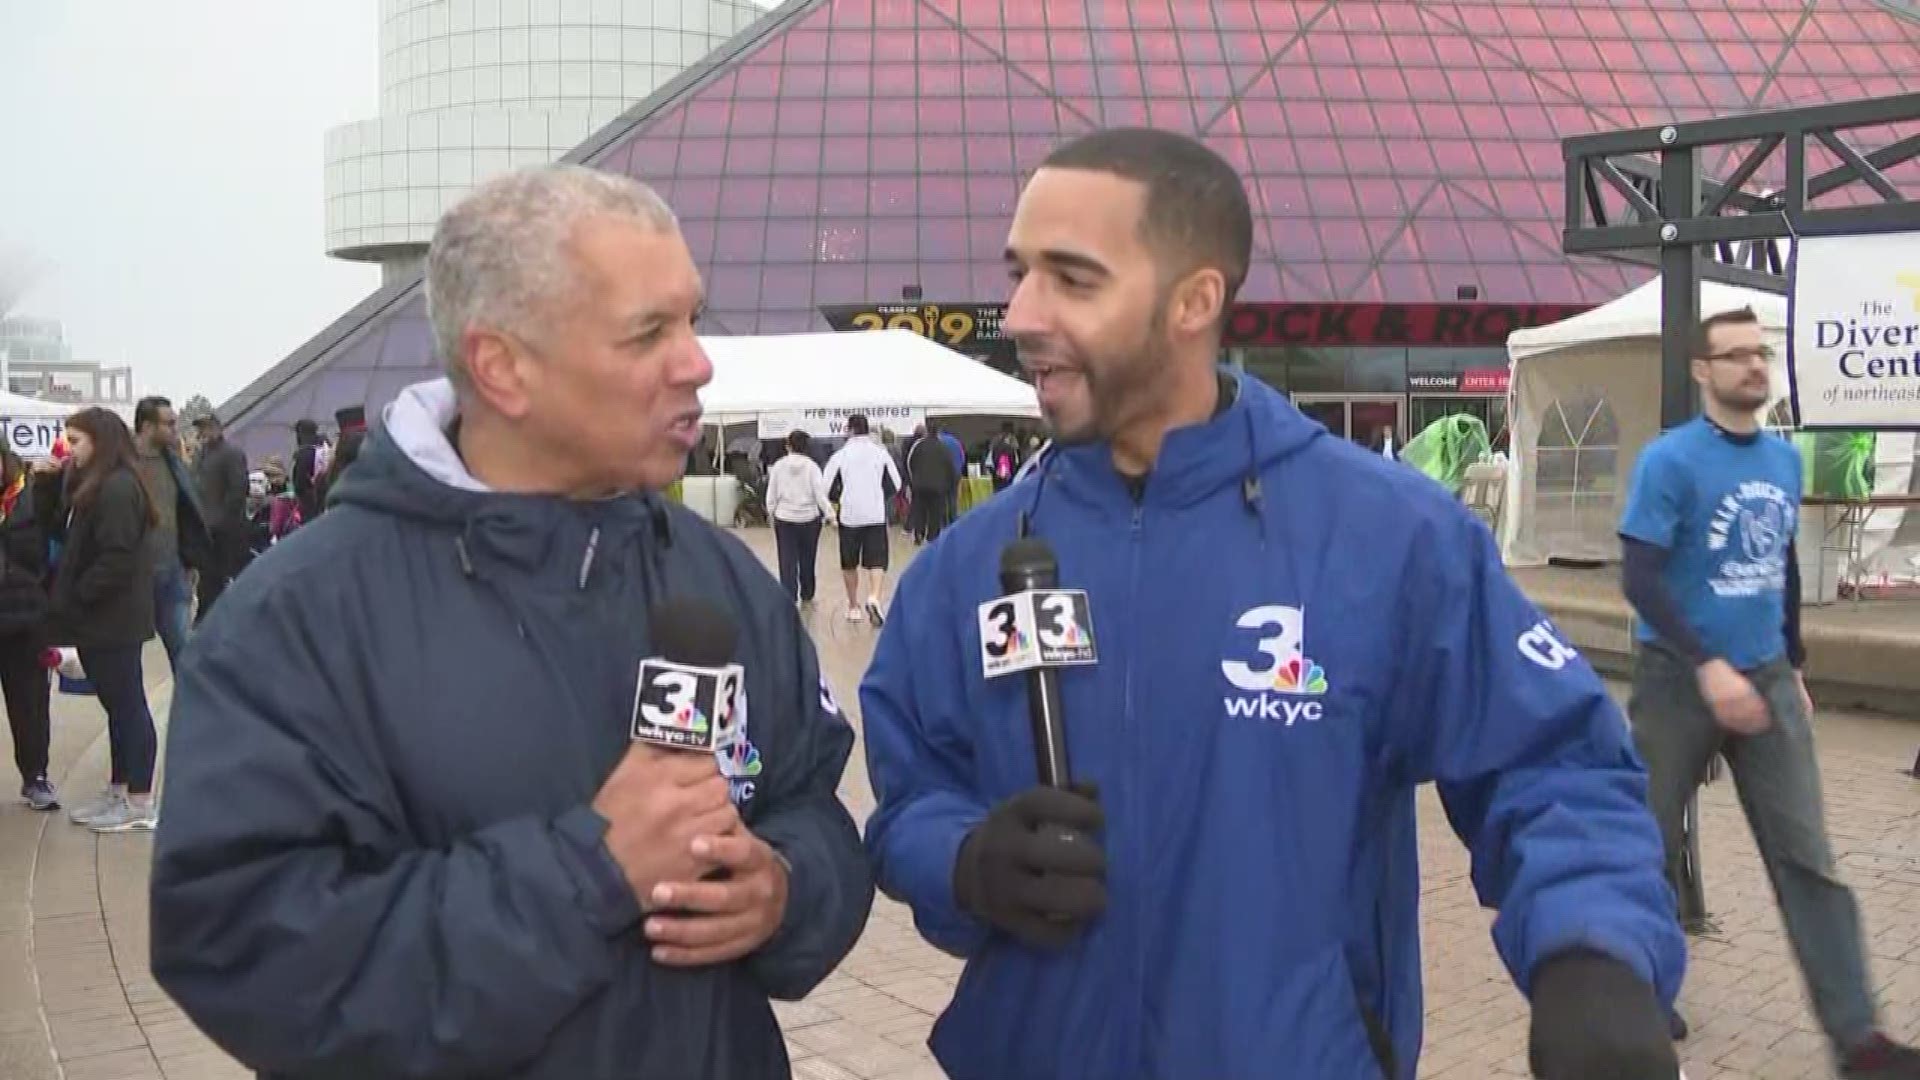 Lindsay and Michael talk to the Channel 3's Russ Mitchell who is the Grand Marshall of today's Diversity Walk, Walk and Run at the Rock and Roll Hall of Fame.